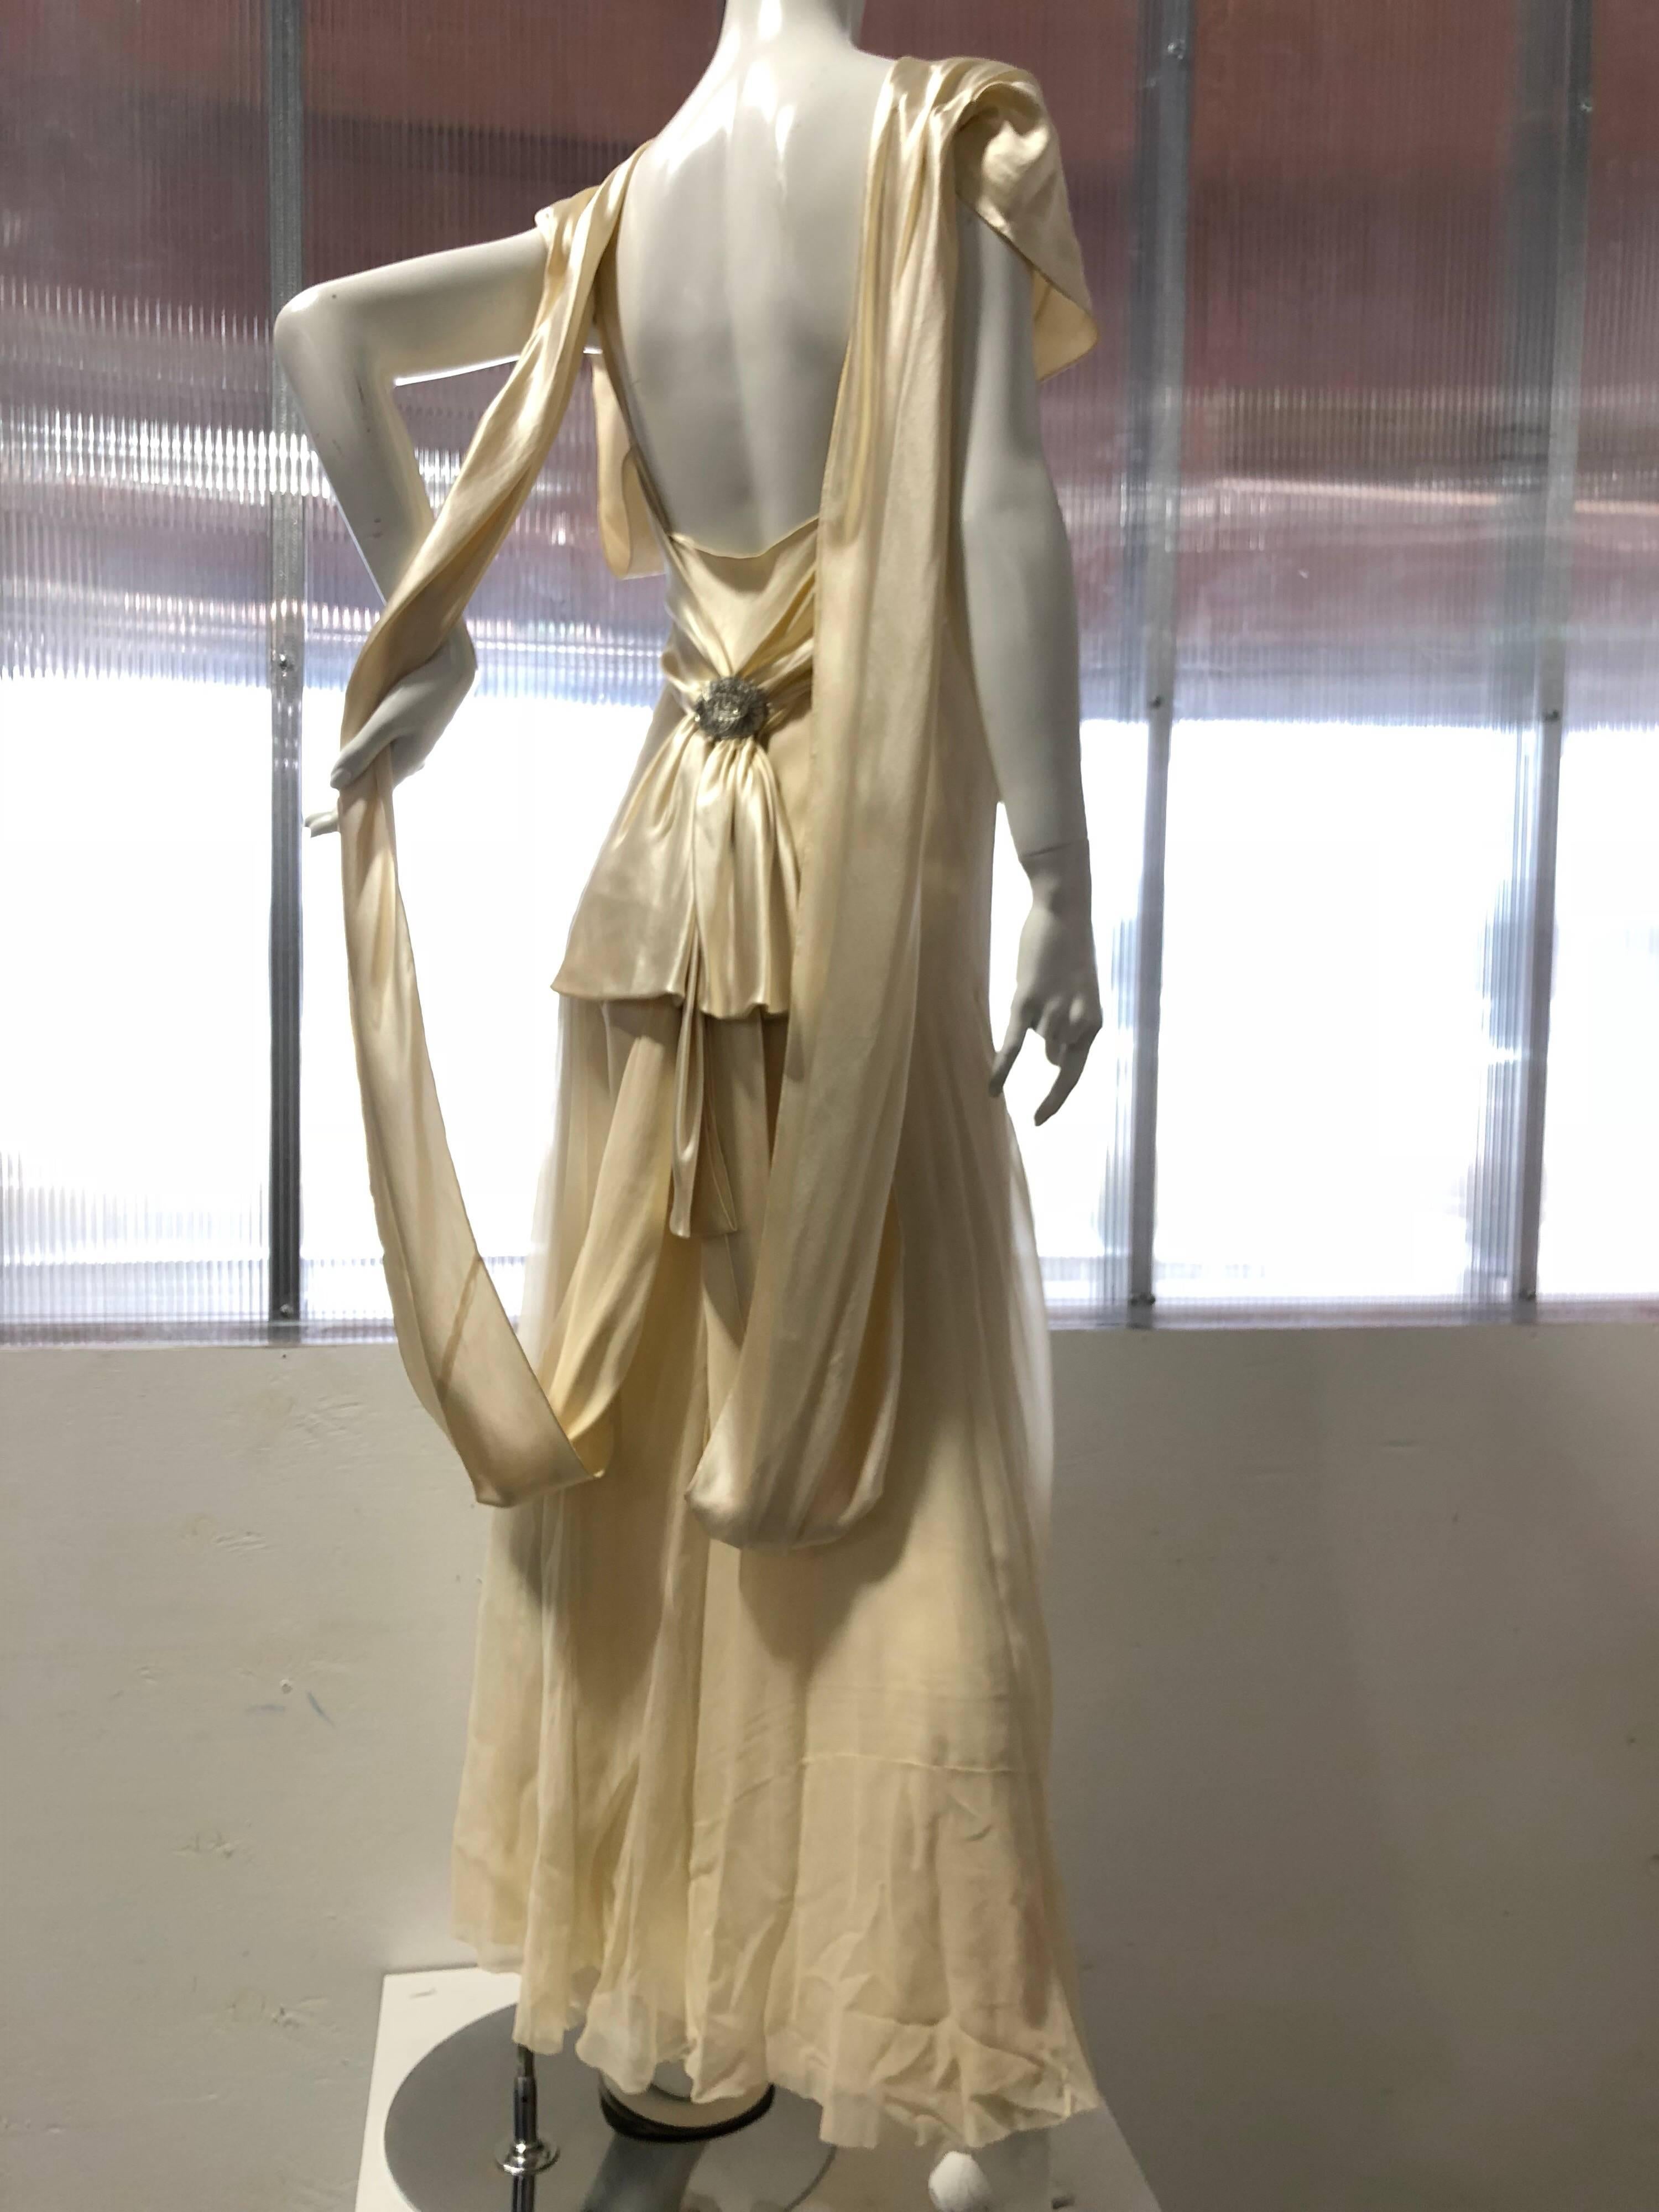 Brown Hattie Carnegie Art Deco Bias Gown in Candlelight Silk Satin and Chiffon, 1930s 